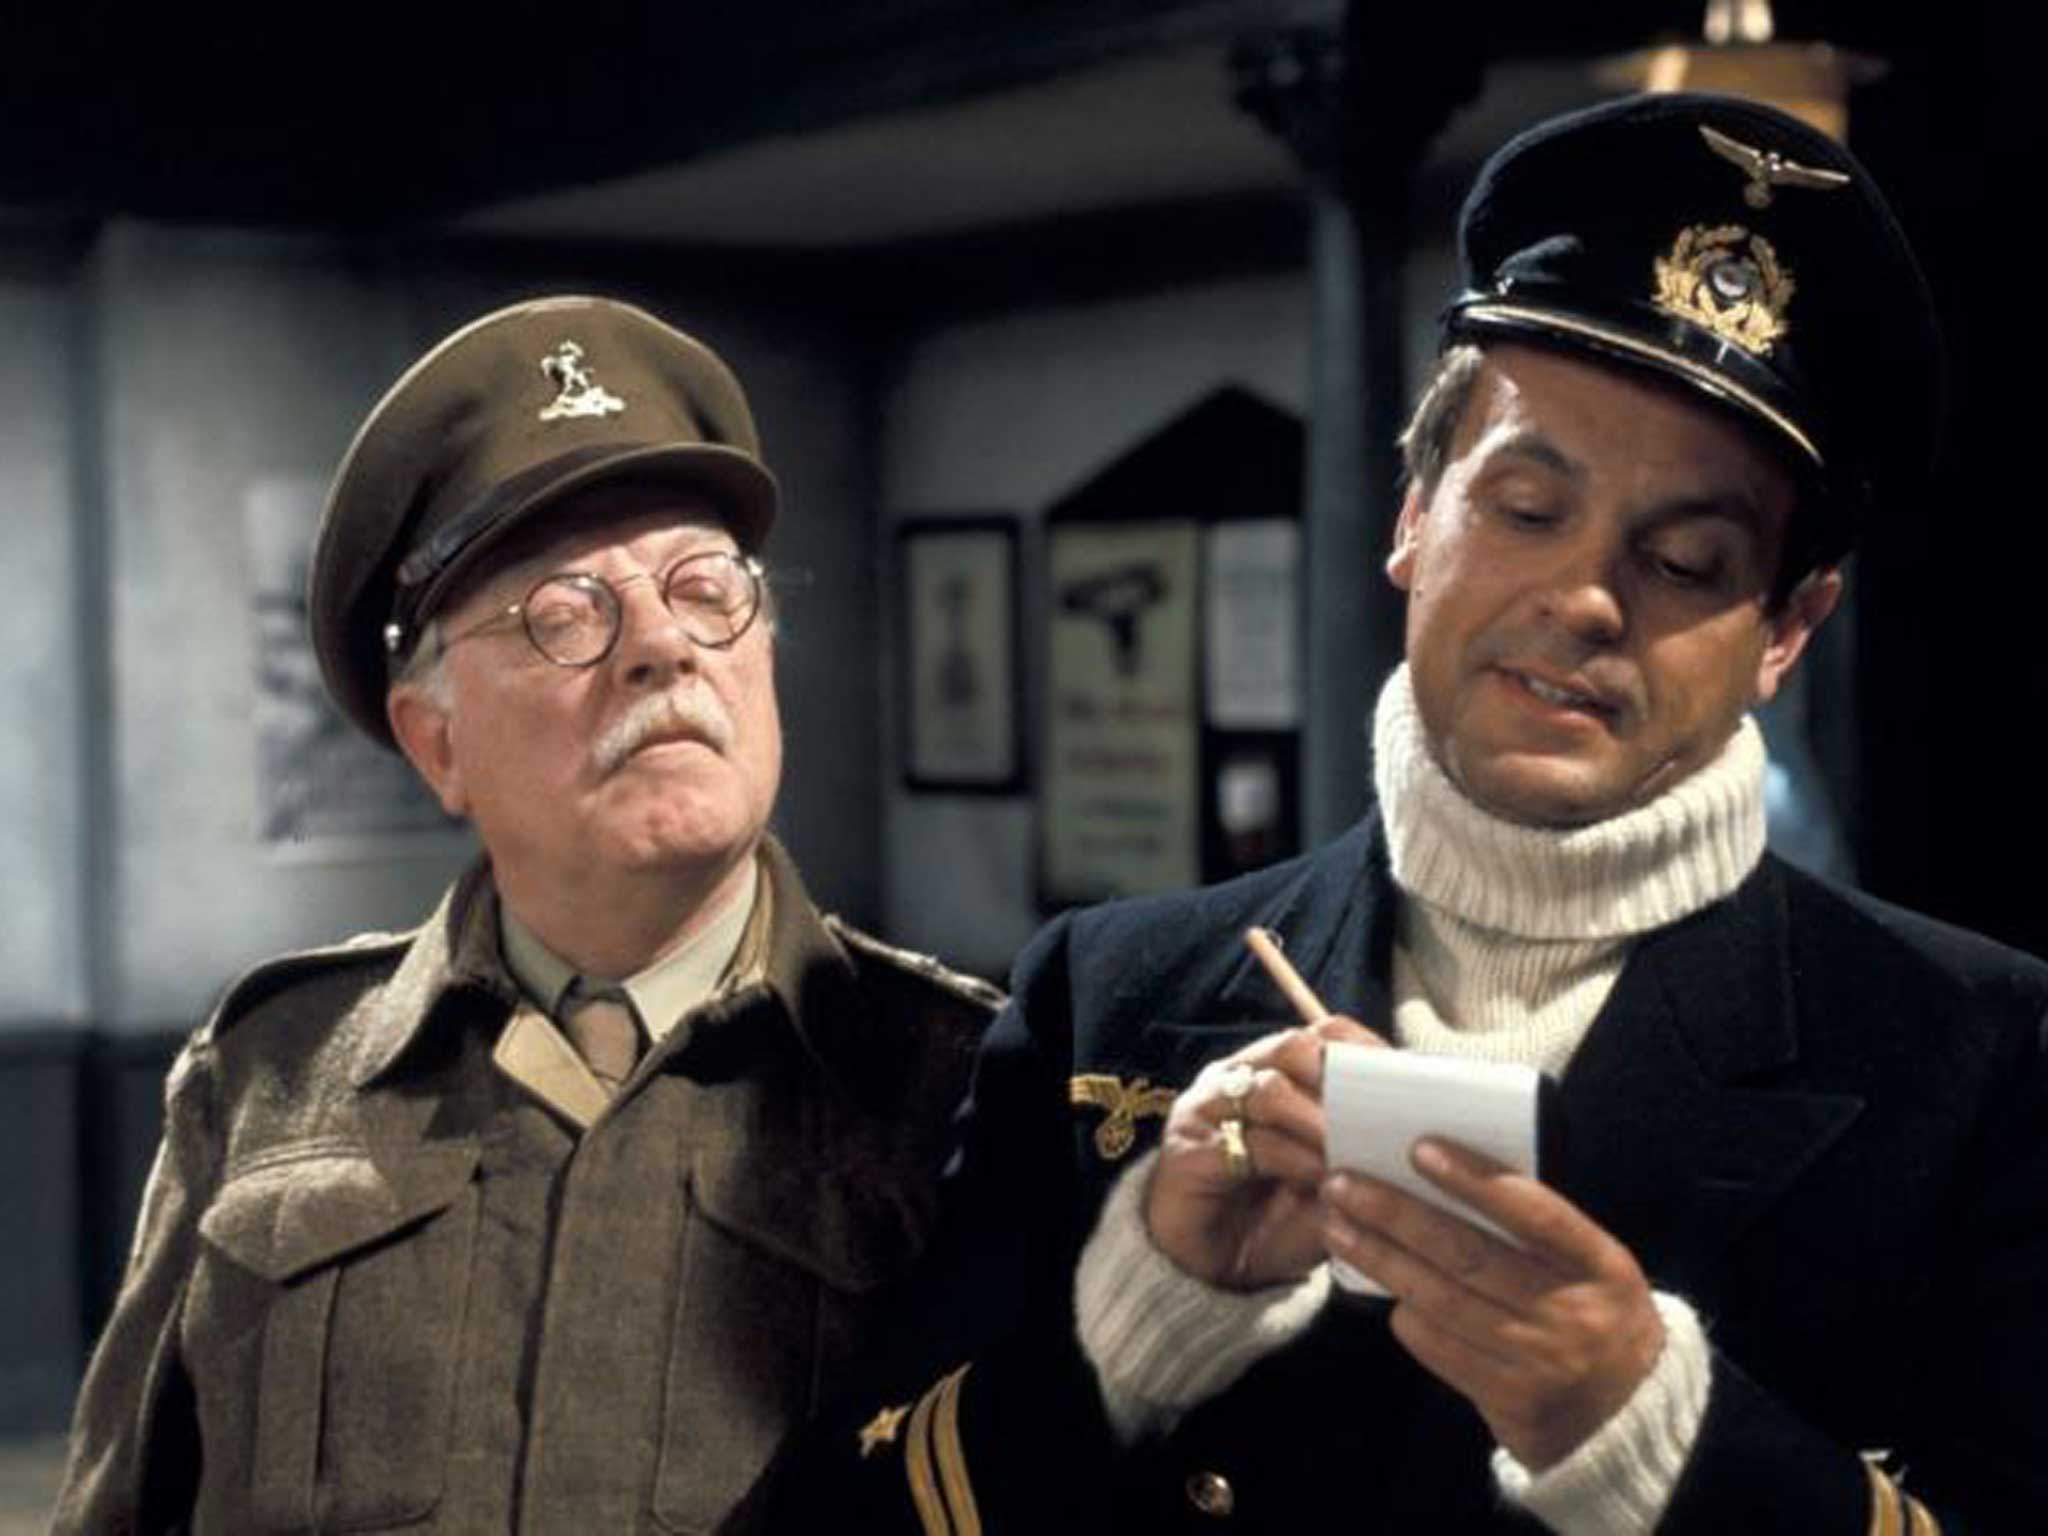 Dad’s Army lasted three years longer than the Second World War